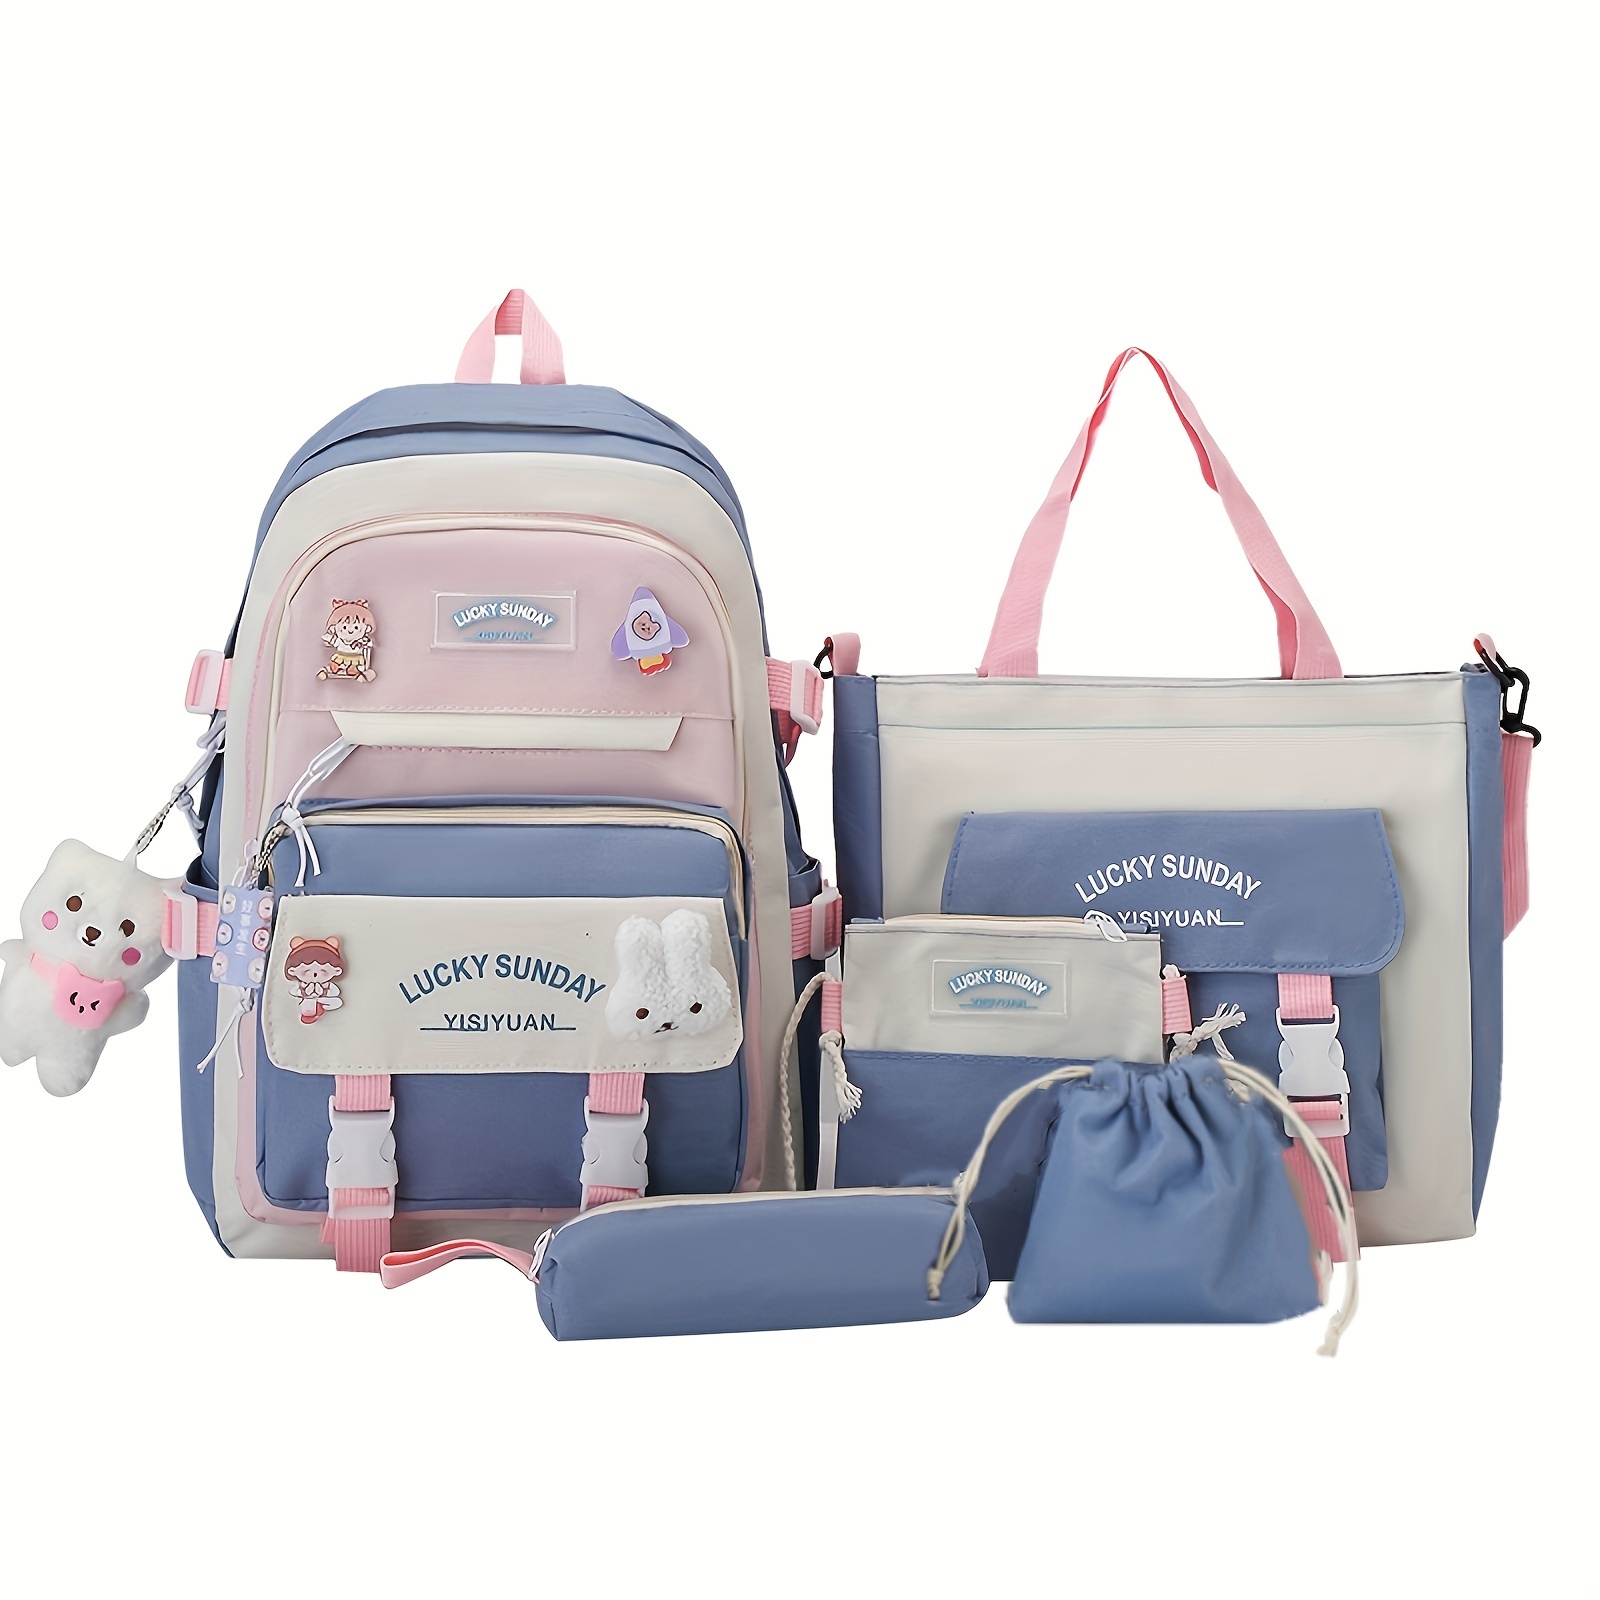 

5pcs Set, Stylish Oxford Fabric School Backpack, Large Capacity Lightweight Bag With Cute Bear Pendant & Matching Accessories